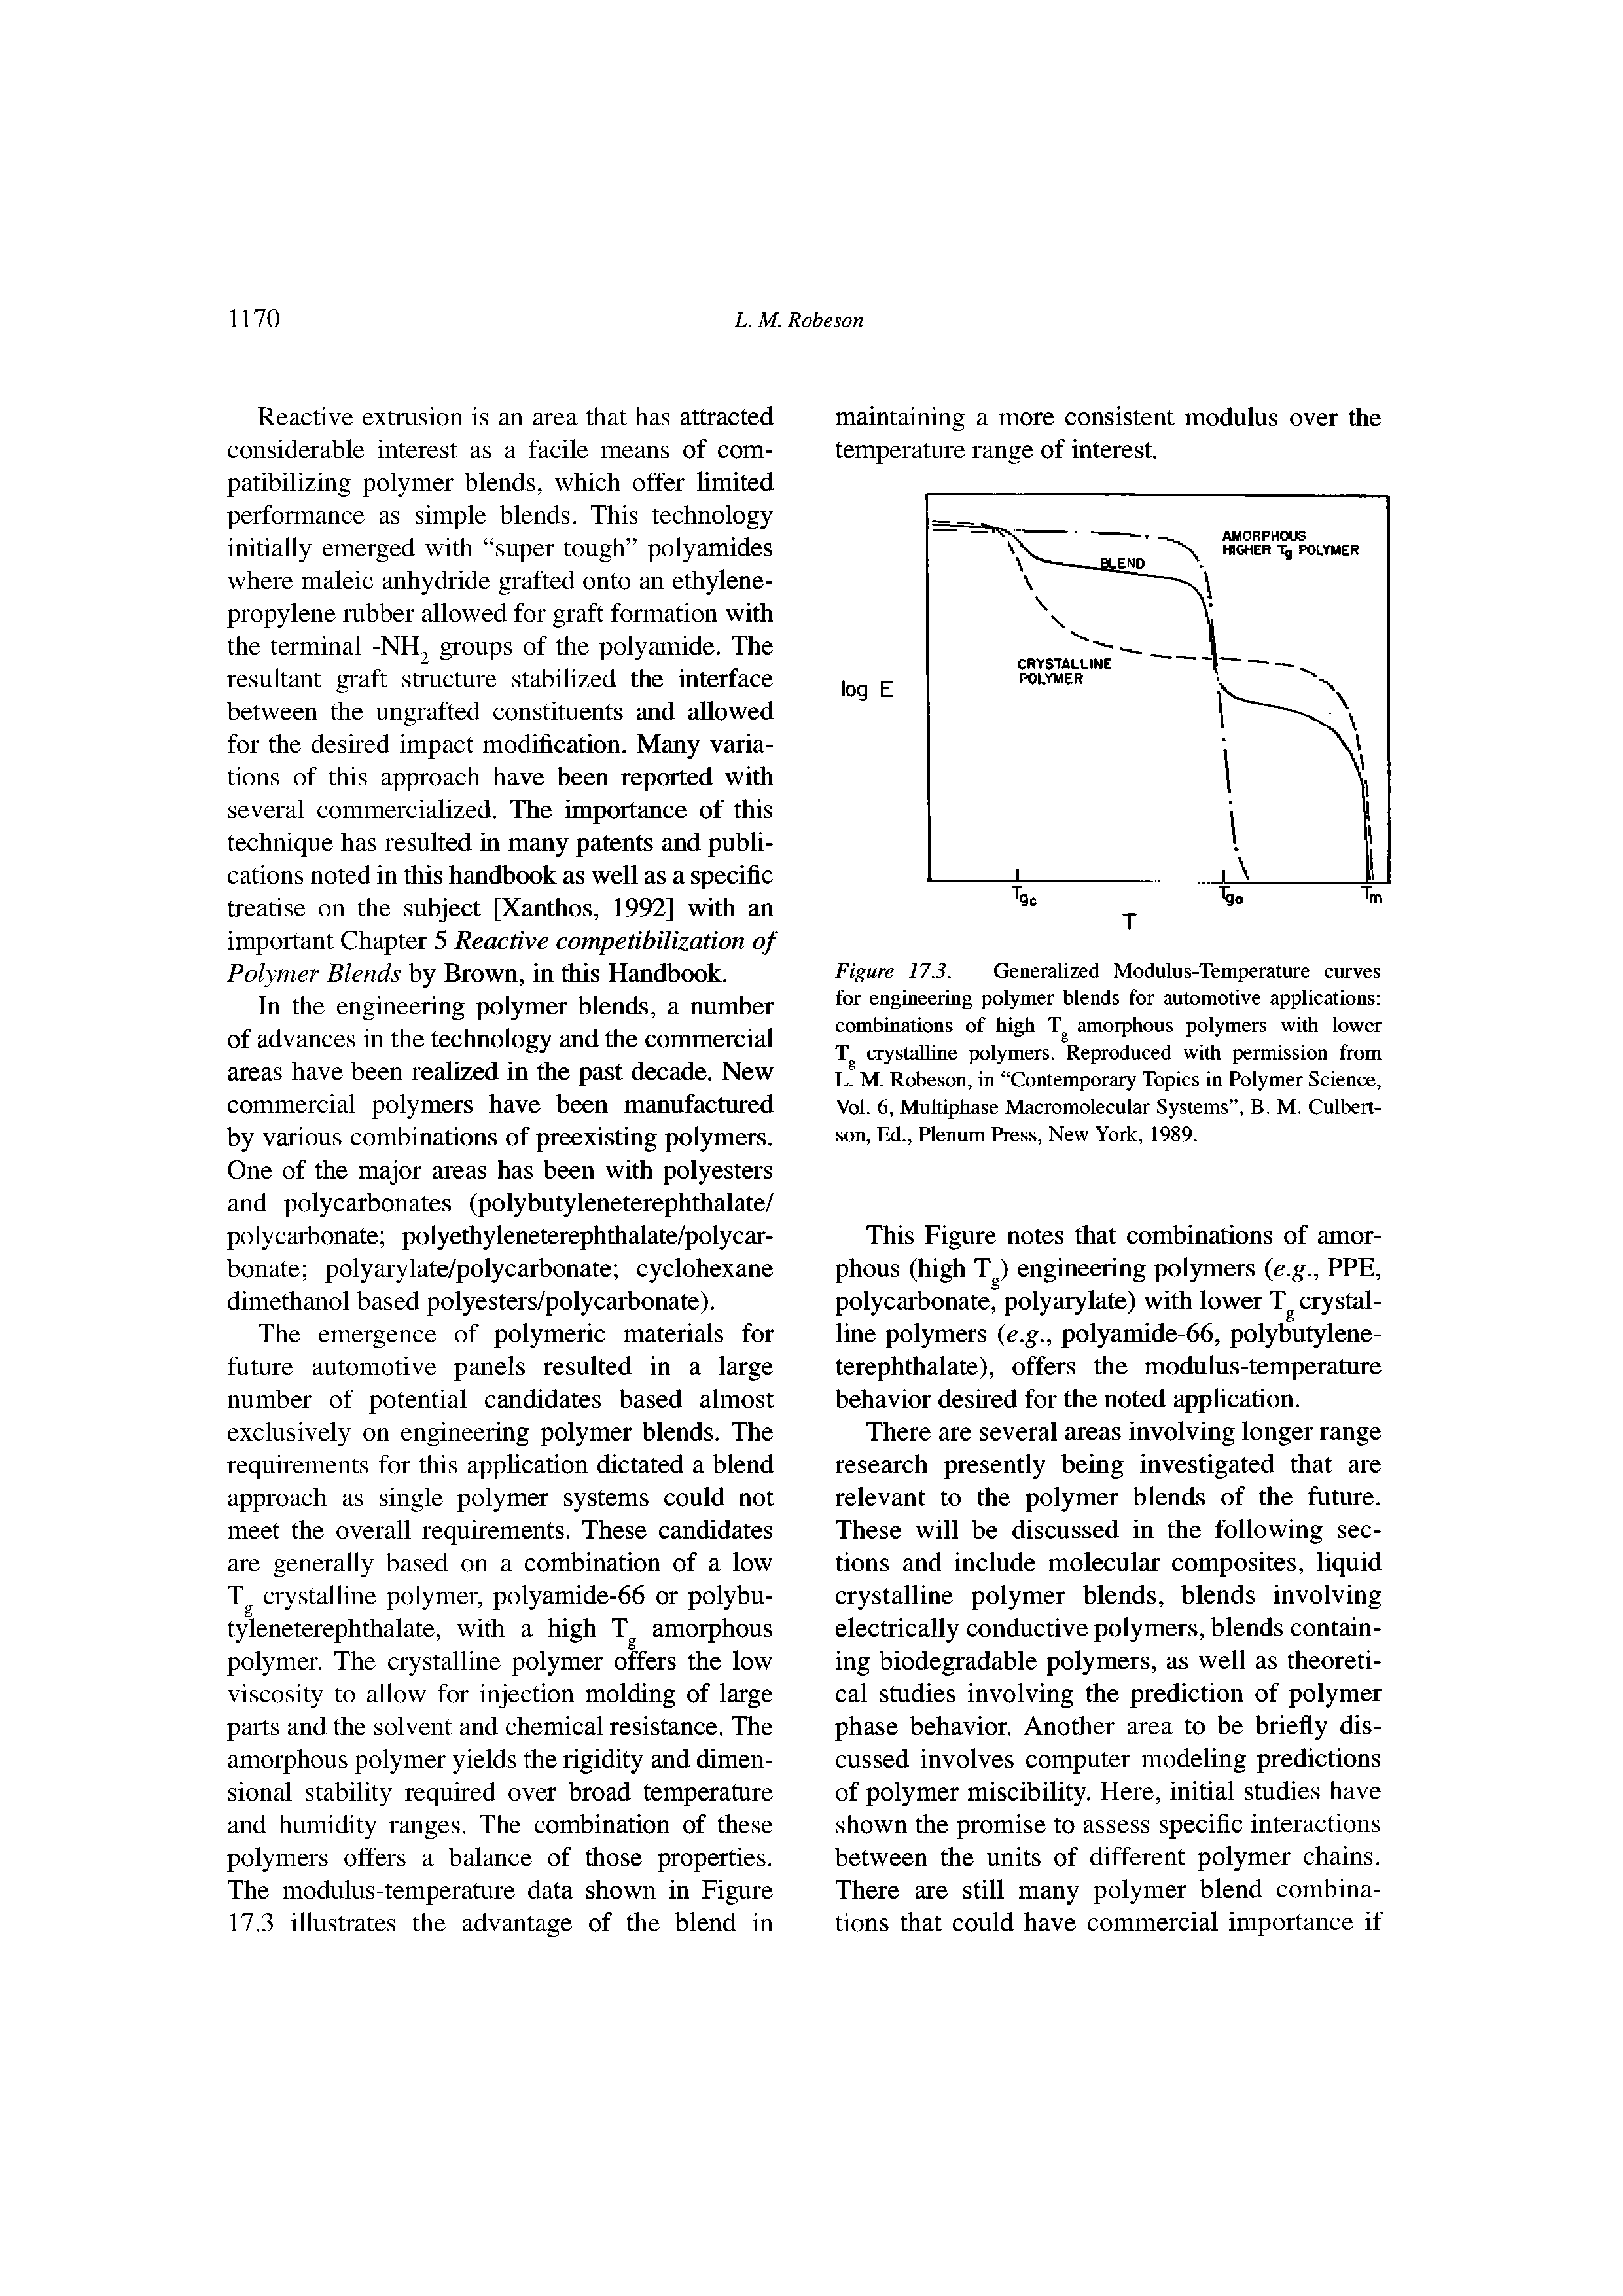 Figure 17.3. Generalized Modulus-Temperature curves for engineering polymer blends for automotive applications combinations of high amorphous polymers with lower Tg crystalline polymers. Reproduced with permission from L. M. Robeson, in Contemporary Topics in Polymer Science, Vol. 6, Multiphase Macromolecular Systems , B. M. Culbertson, Ed., Plenum Press, New York, 1989.